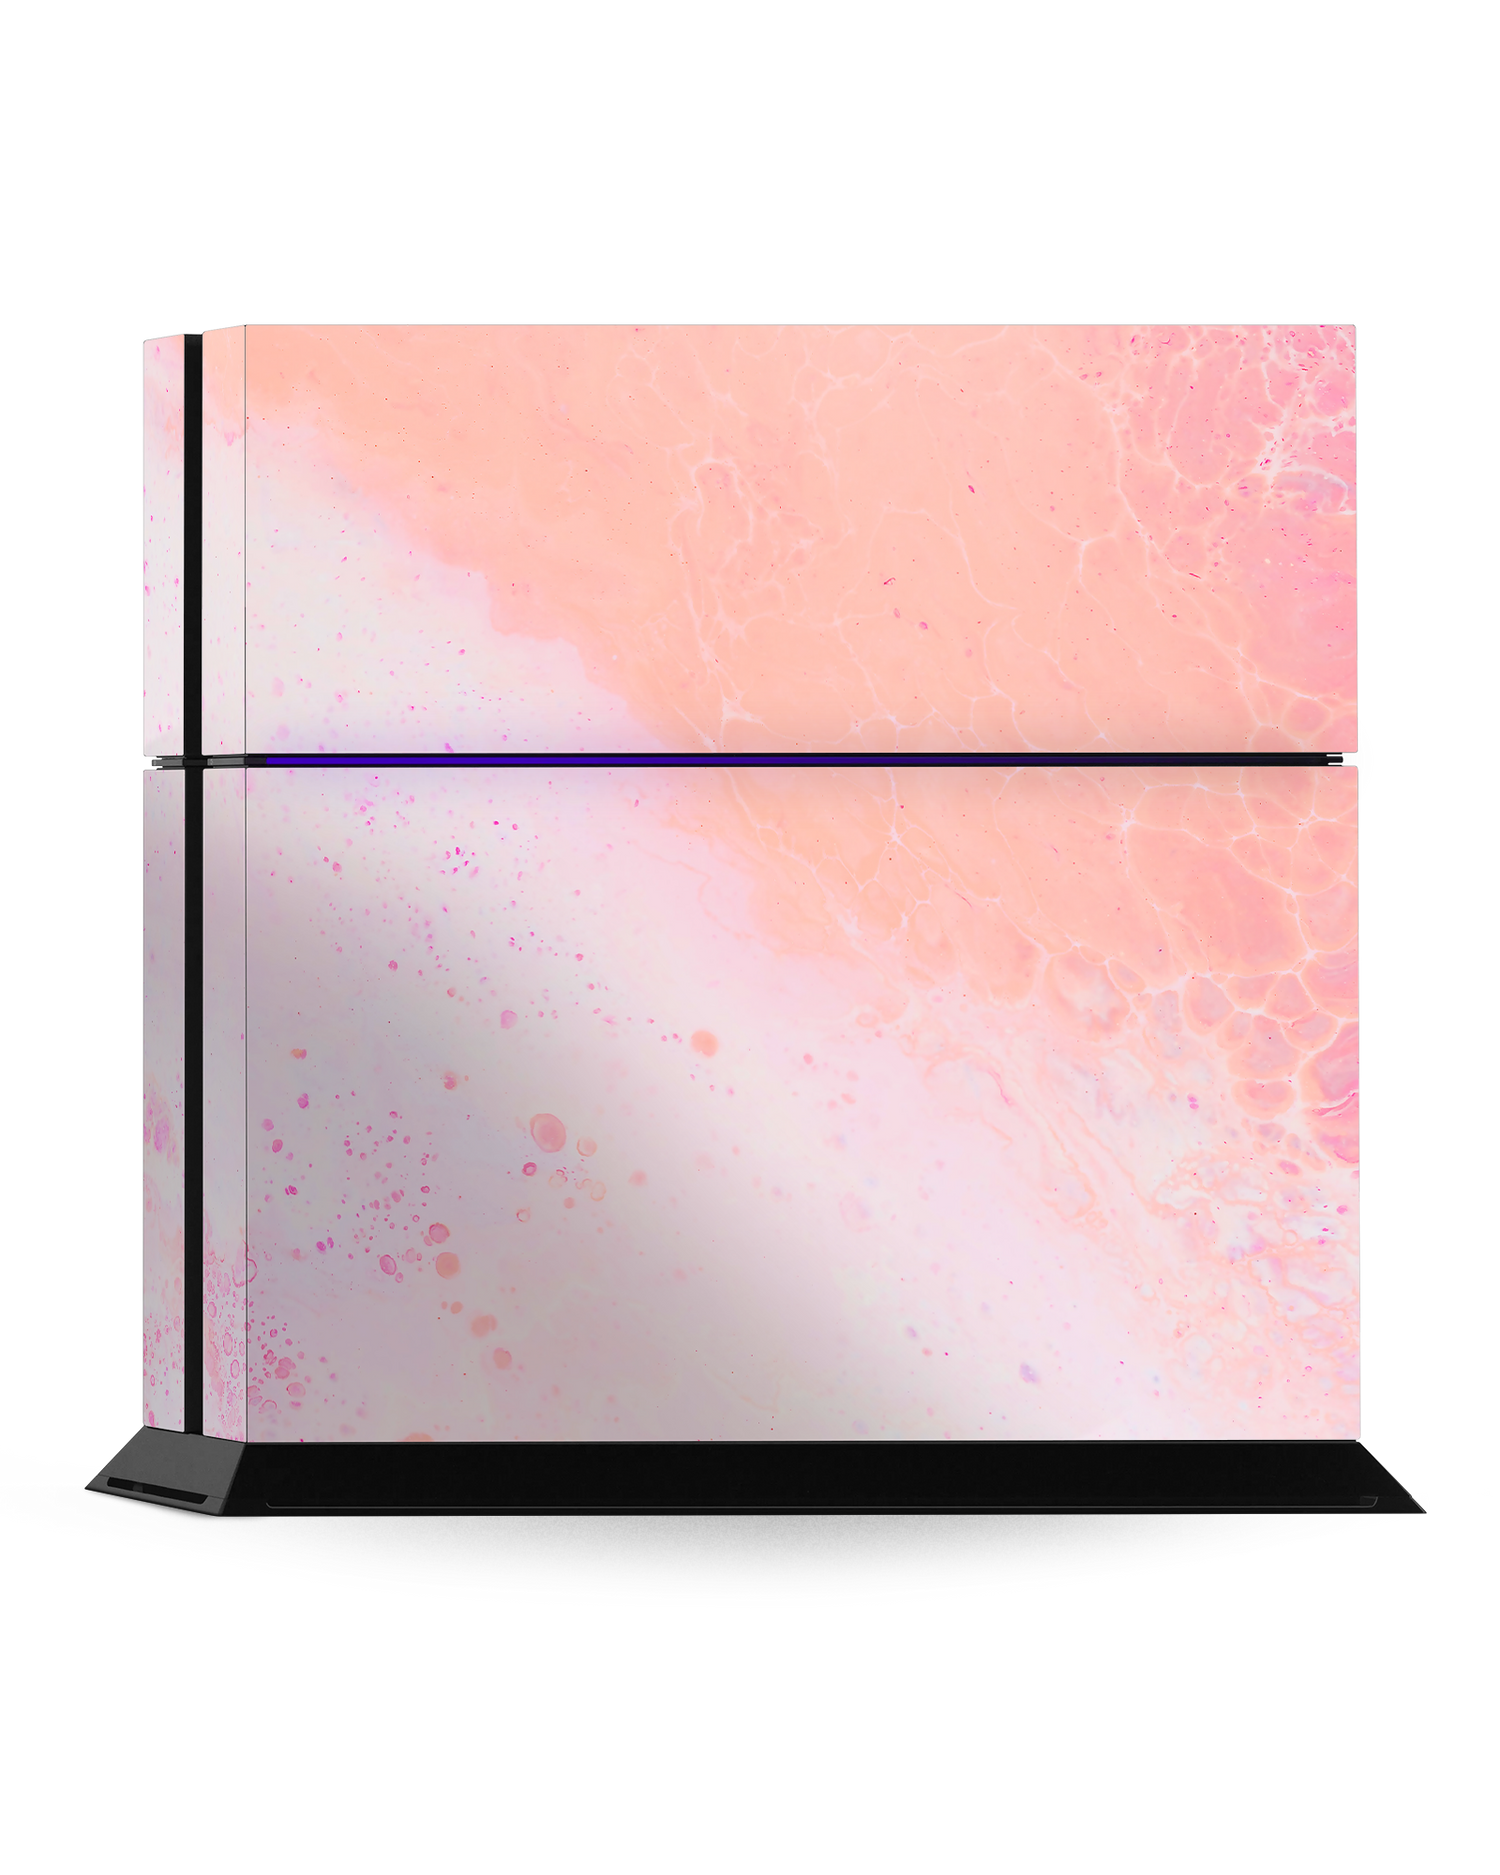 Peaches & Cream Marble Console Skin for Sony PlayStation 4: Standing